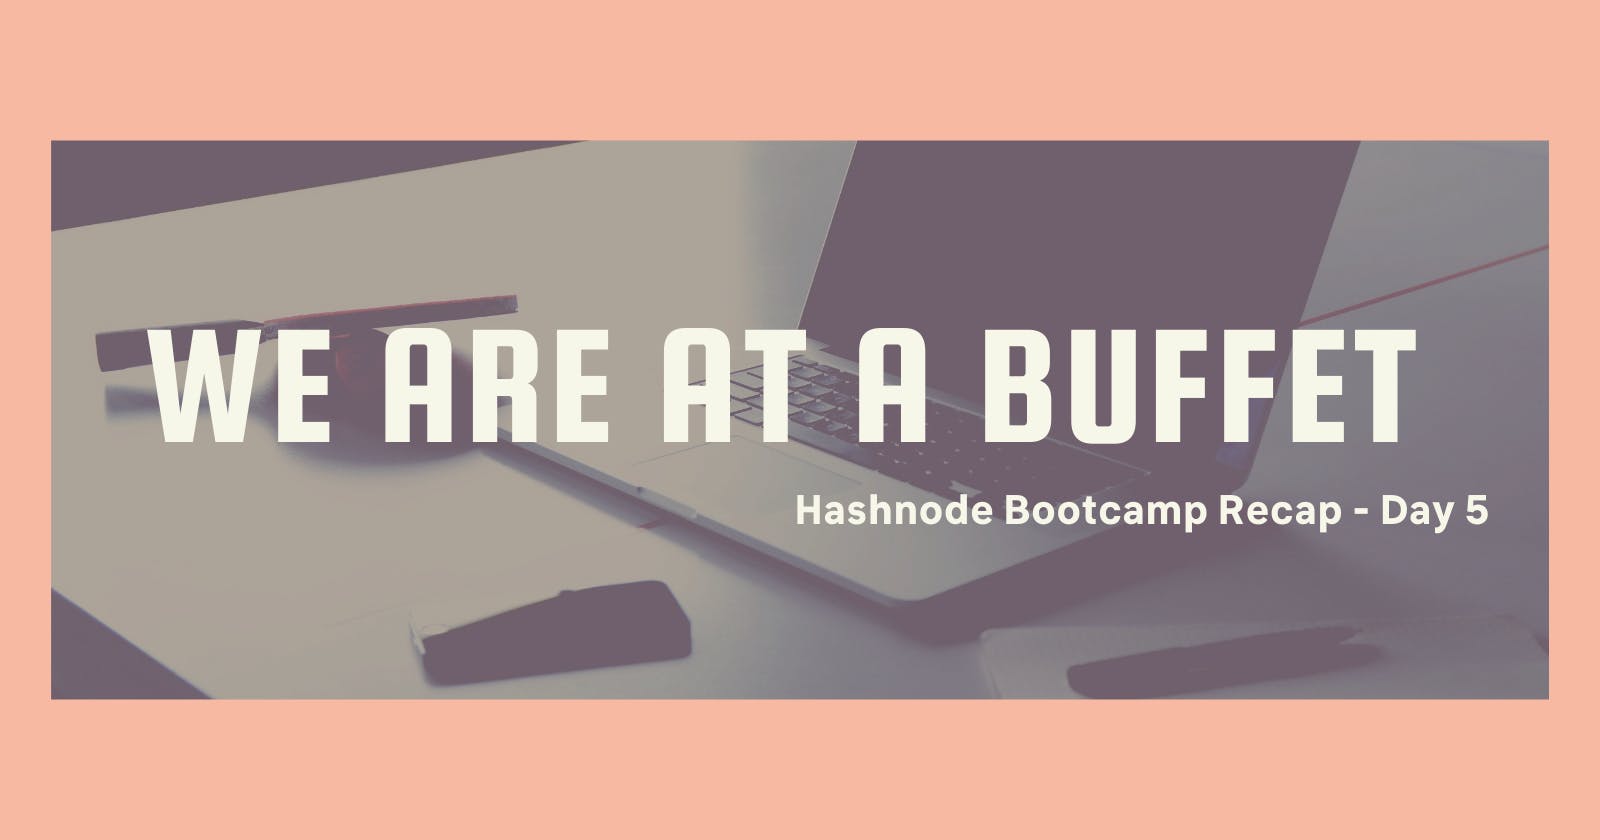 Hashnode Bootcamp: We Are At A Buffet